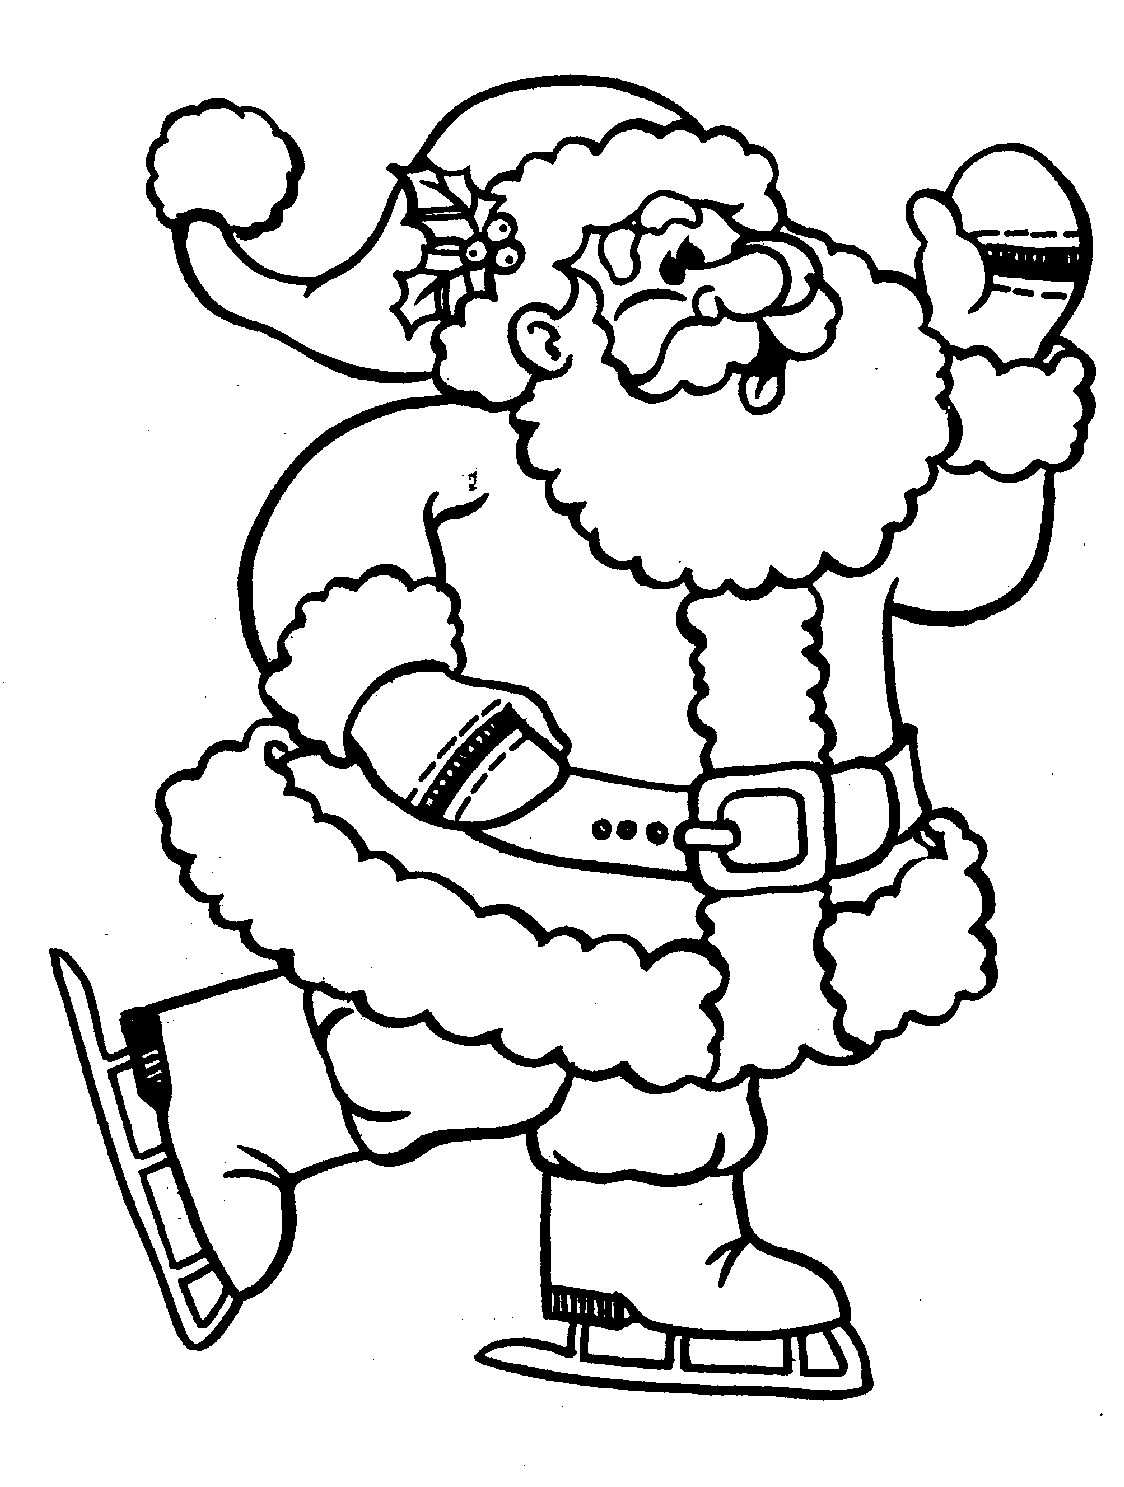 Coloring Pages Christmas | Coloring pages for Christmas | Christmas trees coloring pages | #6